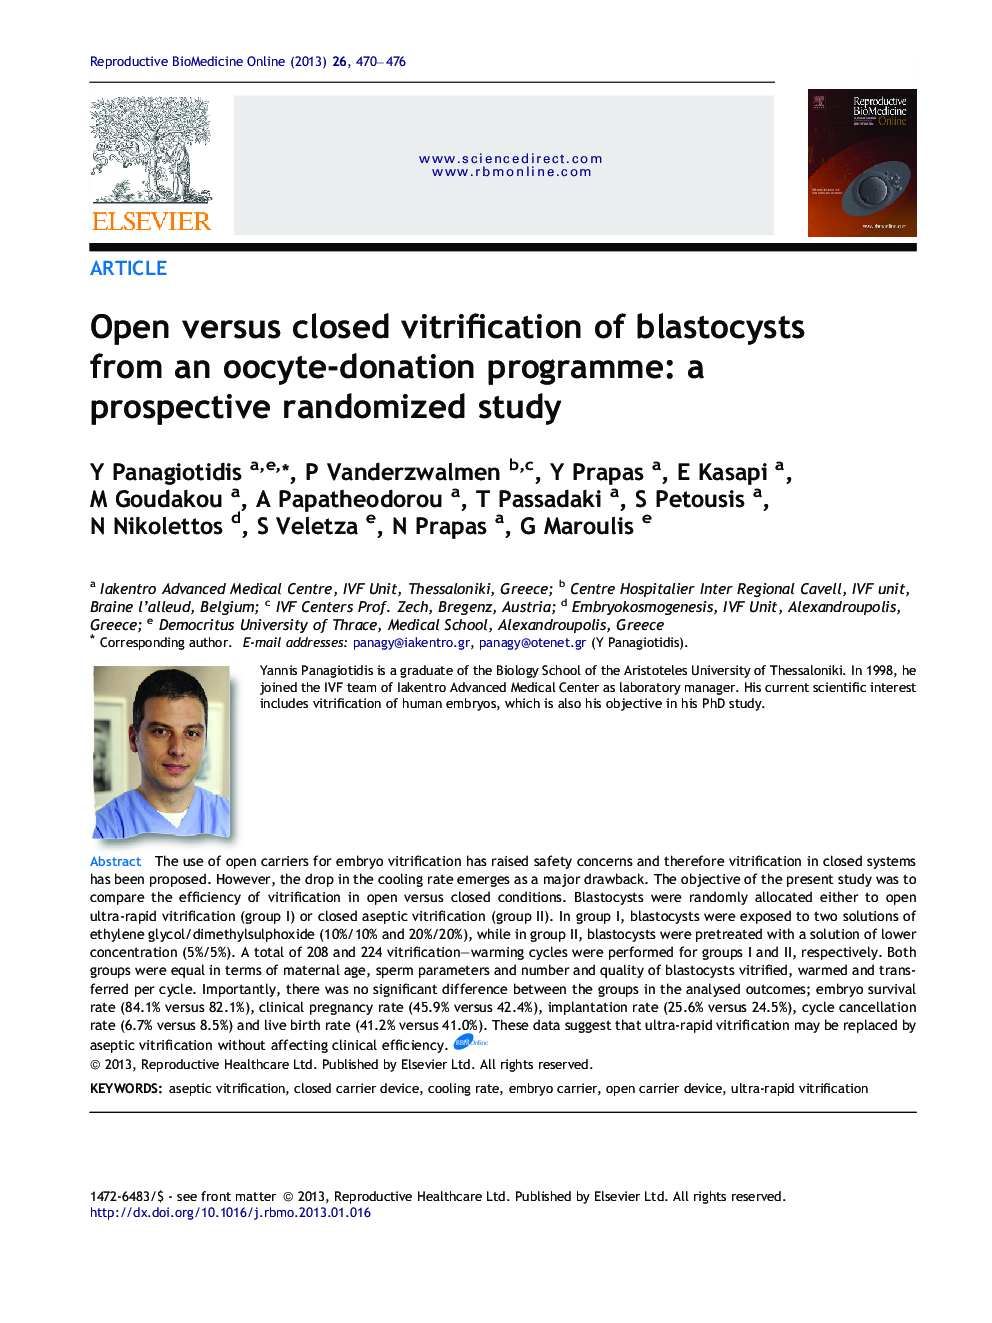 Open versus closed vitrification of blastocysts from an oocyte-donation programme: a prospective randomized study